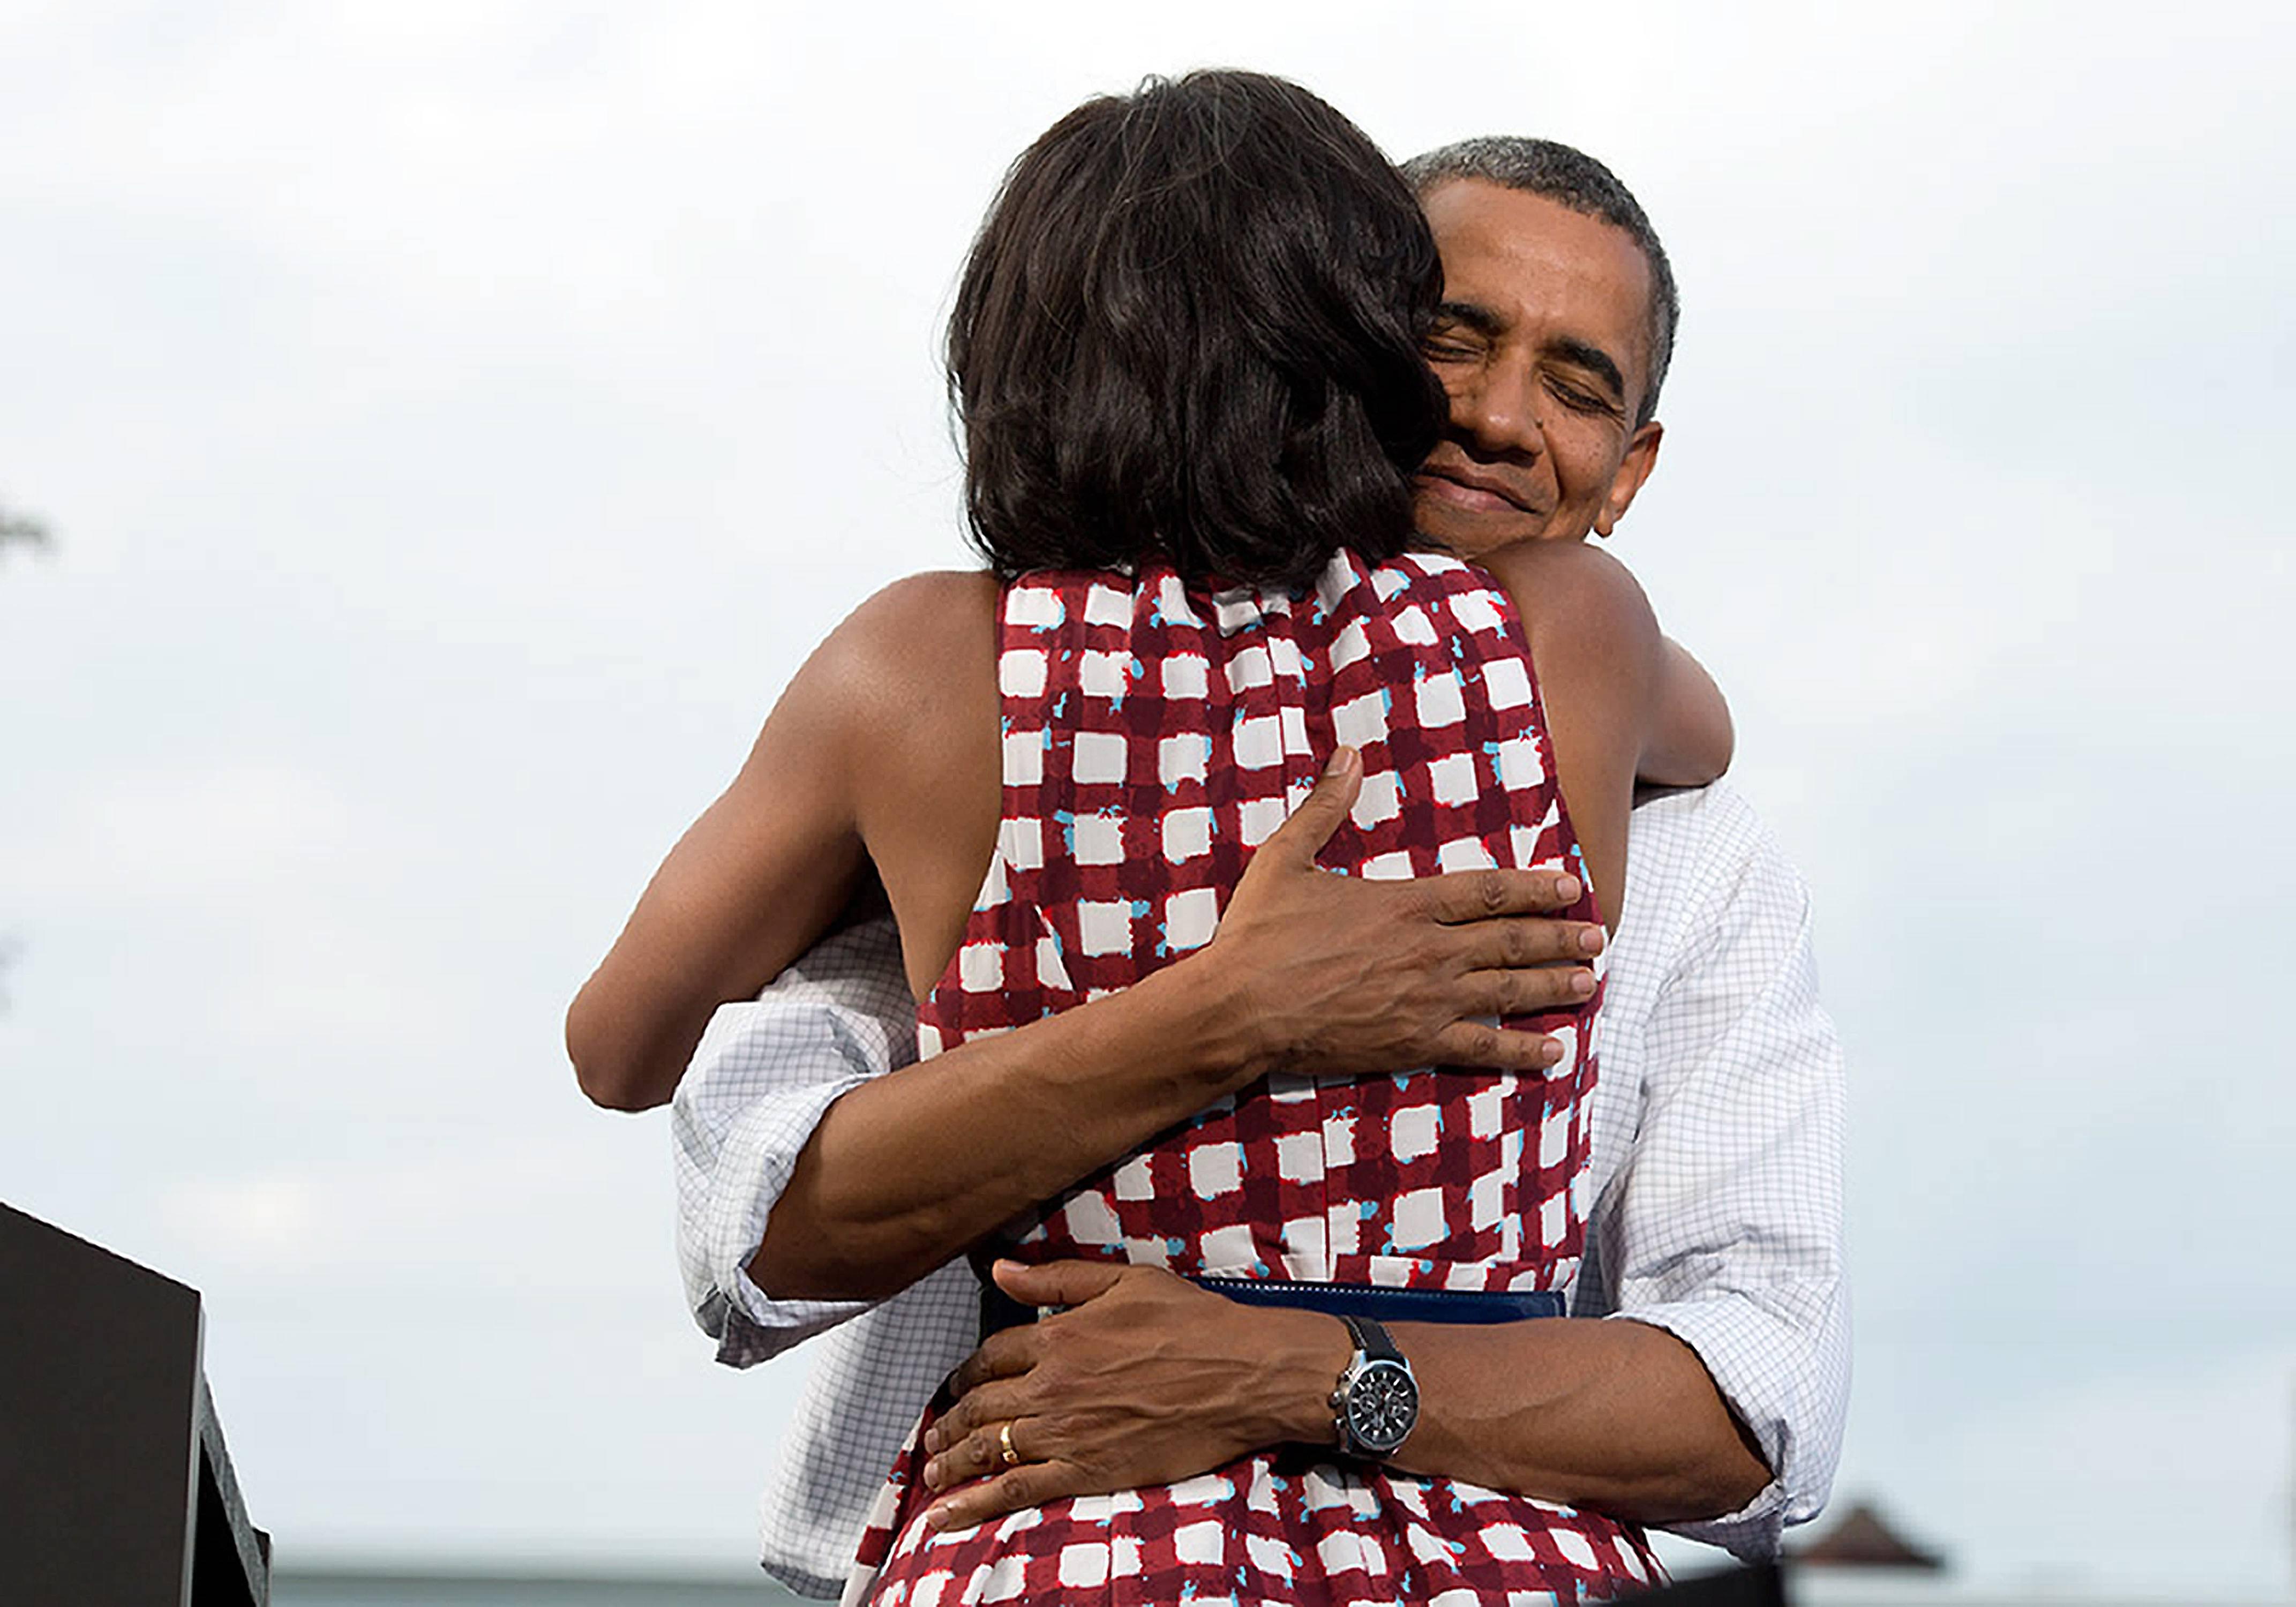 Aug. 15, 2012."The President hugs the First Lady after she had introduced him at a campaign event in Davenport, Iowa. The campaign tweeted a similar photo from the campaign photographer on election night and a lot of people thought it was taken on election day."  CAP/ADM/CNP/PS ©Pete Souza/CNP/AdMedia/Capital Pictures Reporters / Capital Pictures